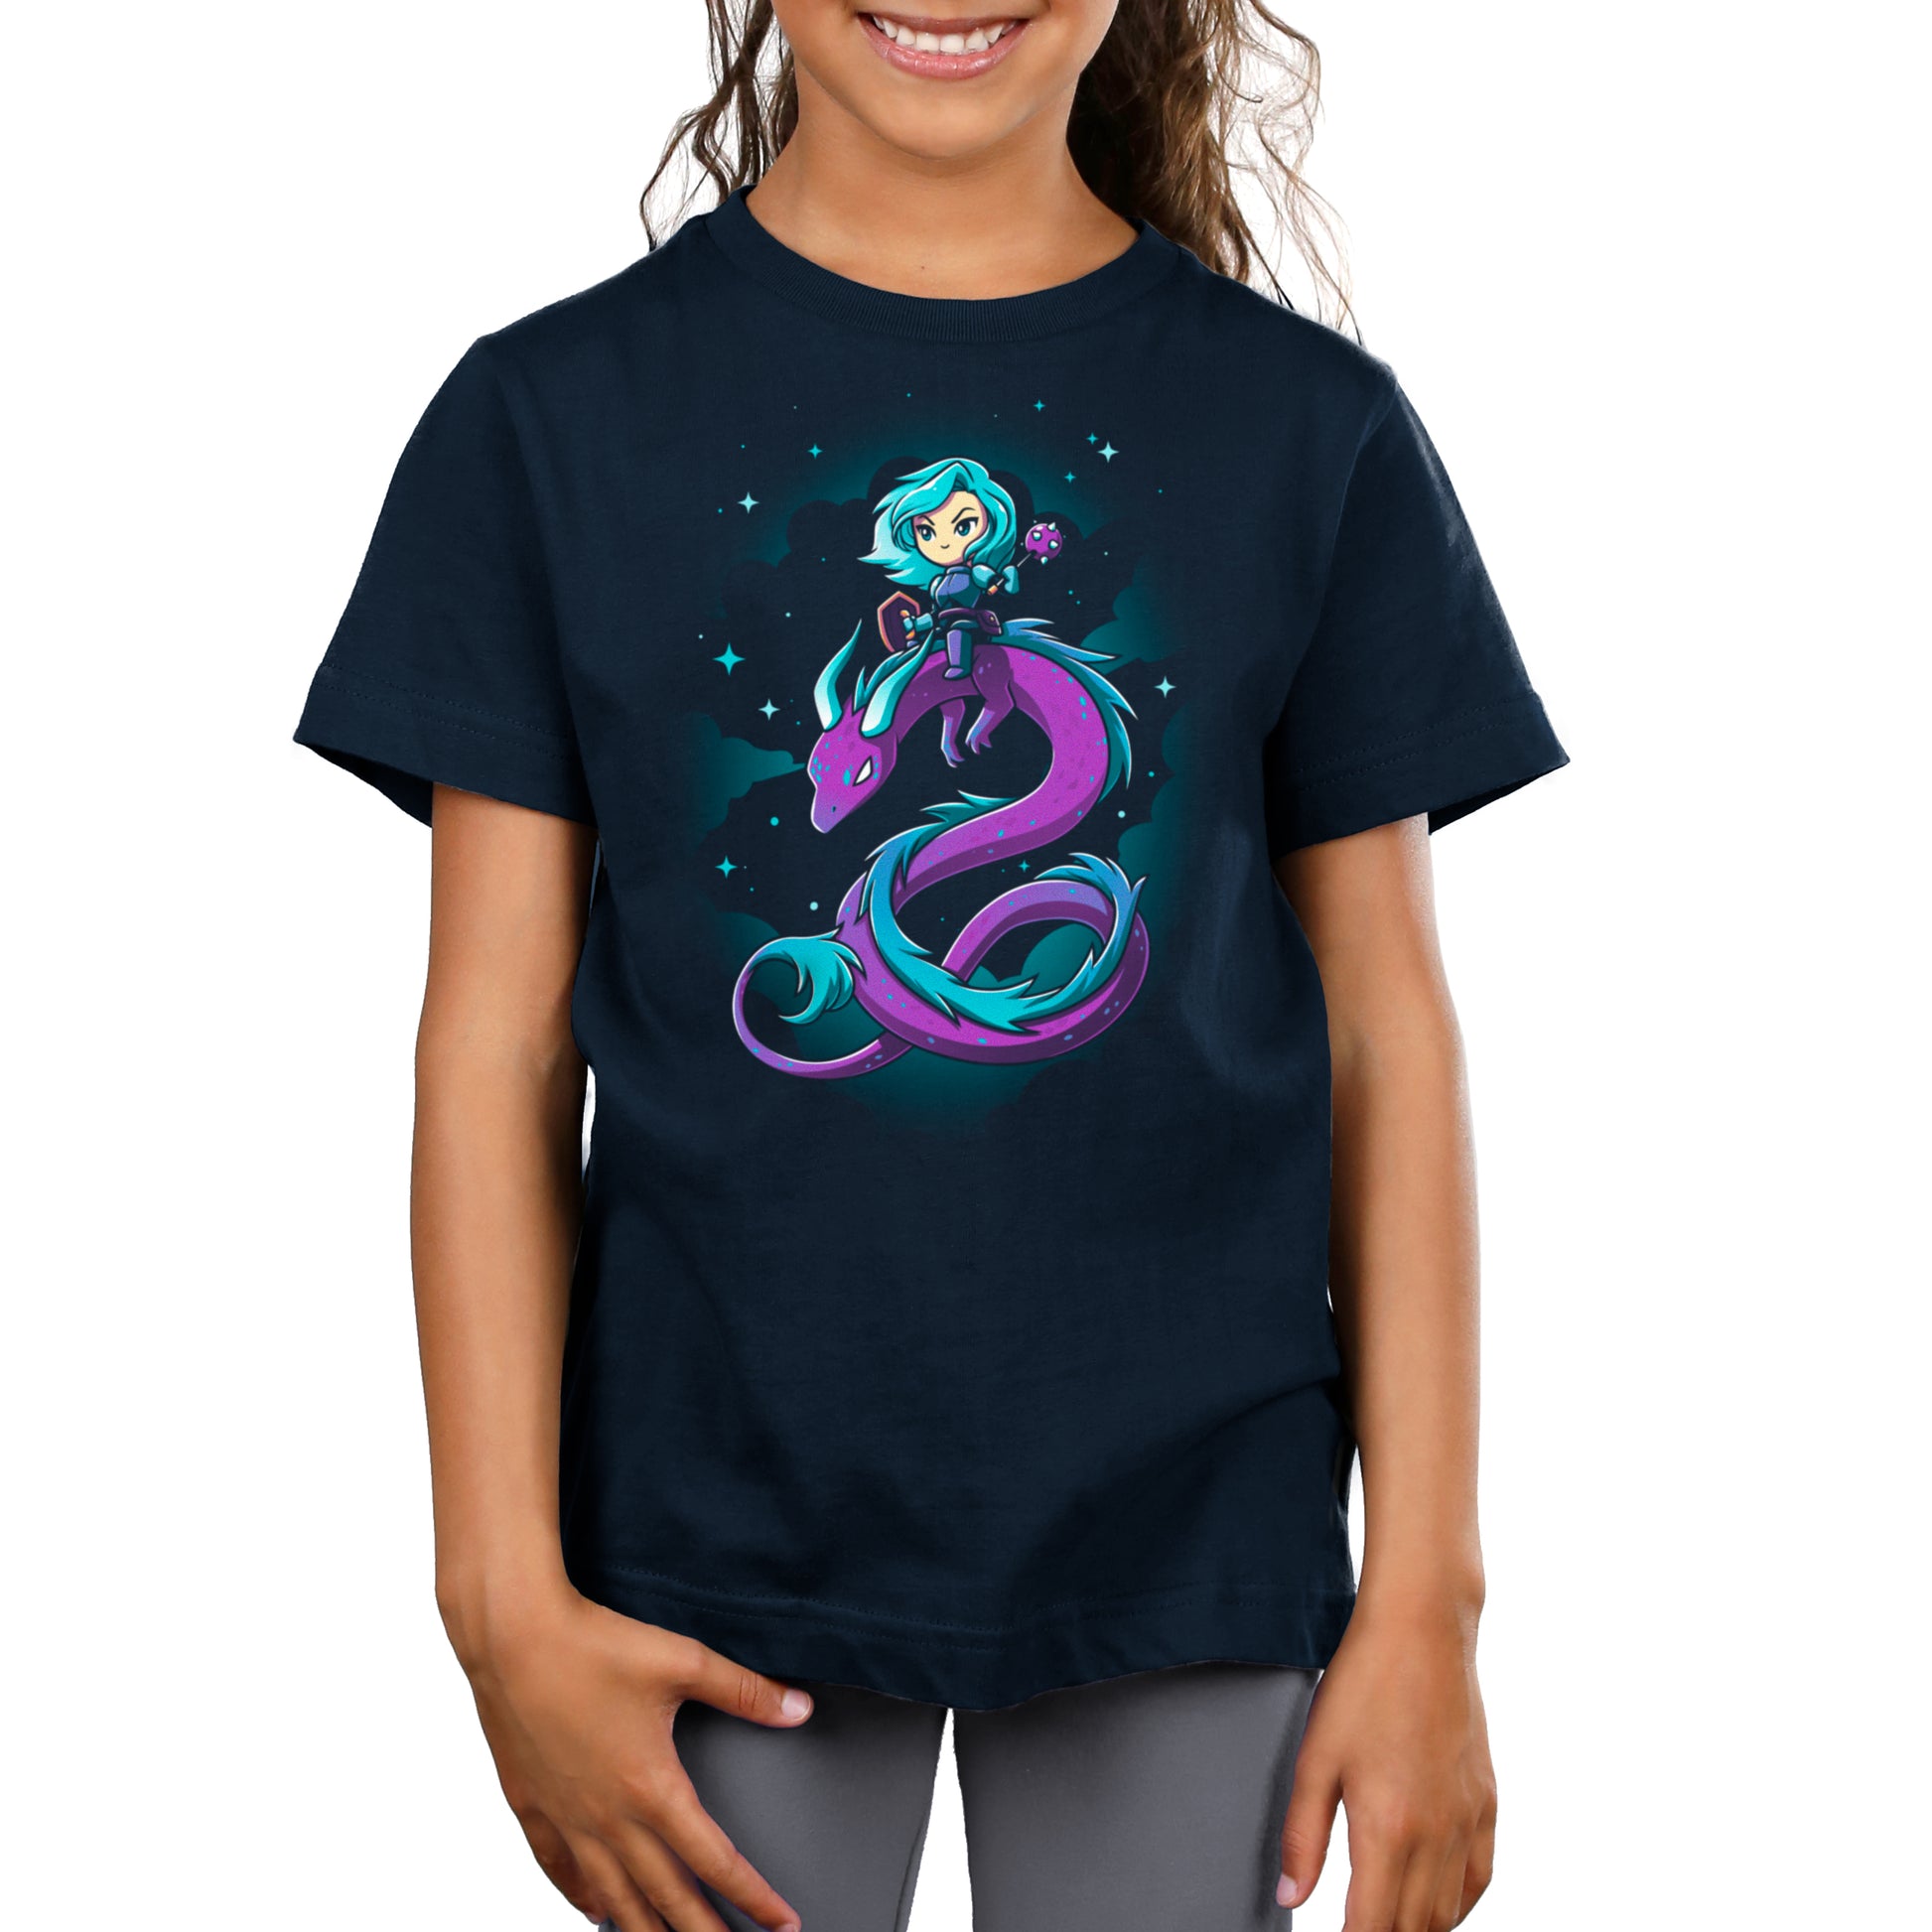 A girl wearing a Dragon Warrior T-shirt by TeeTurtle with an image of a snake (dragon) on it.